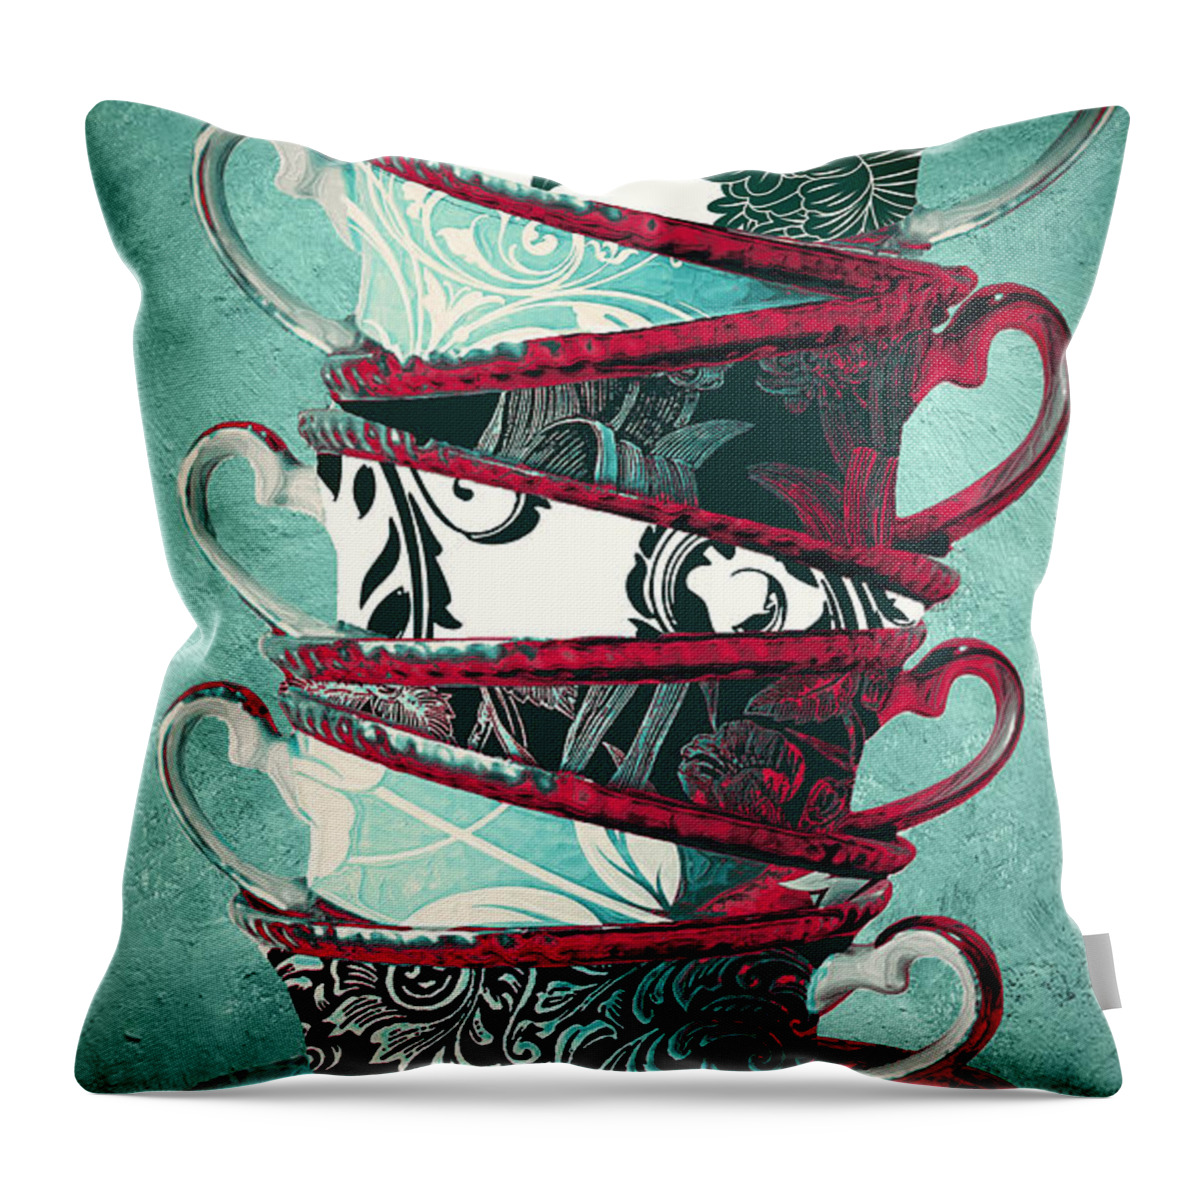 Tea Throw Pillow featuring the painting Afternoon Tea Aqua by Mindy Sommers